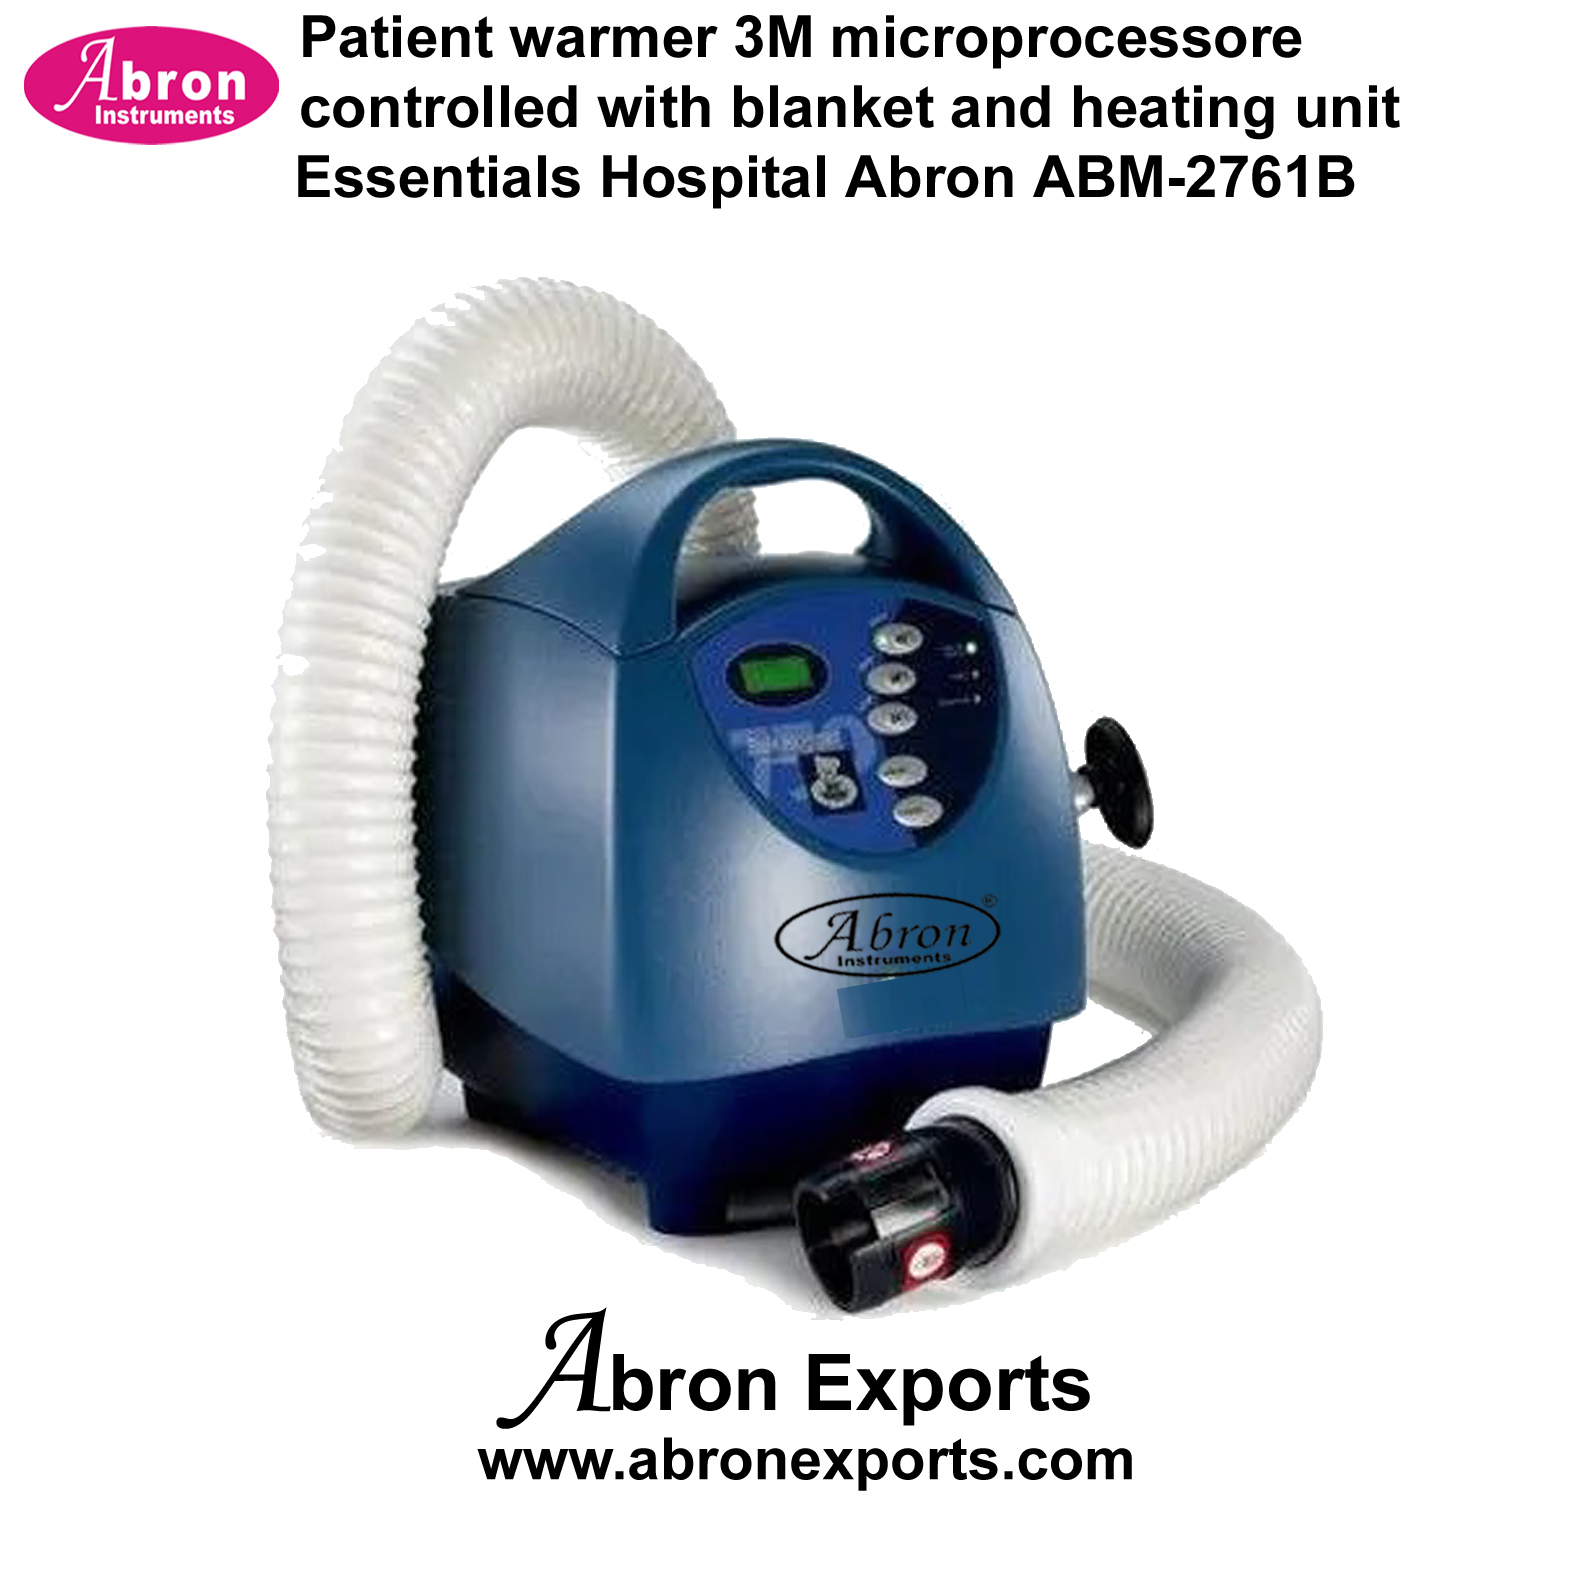 Patient warmer 3M microprocessore controlled with blanket and heating unit Essentials Hospital Abron ABM-2761B 